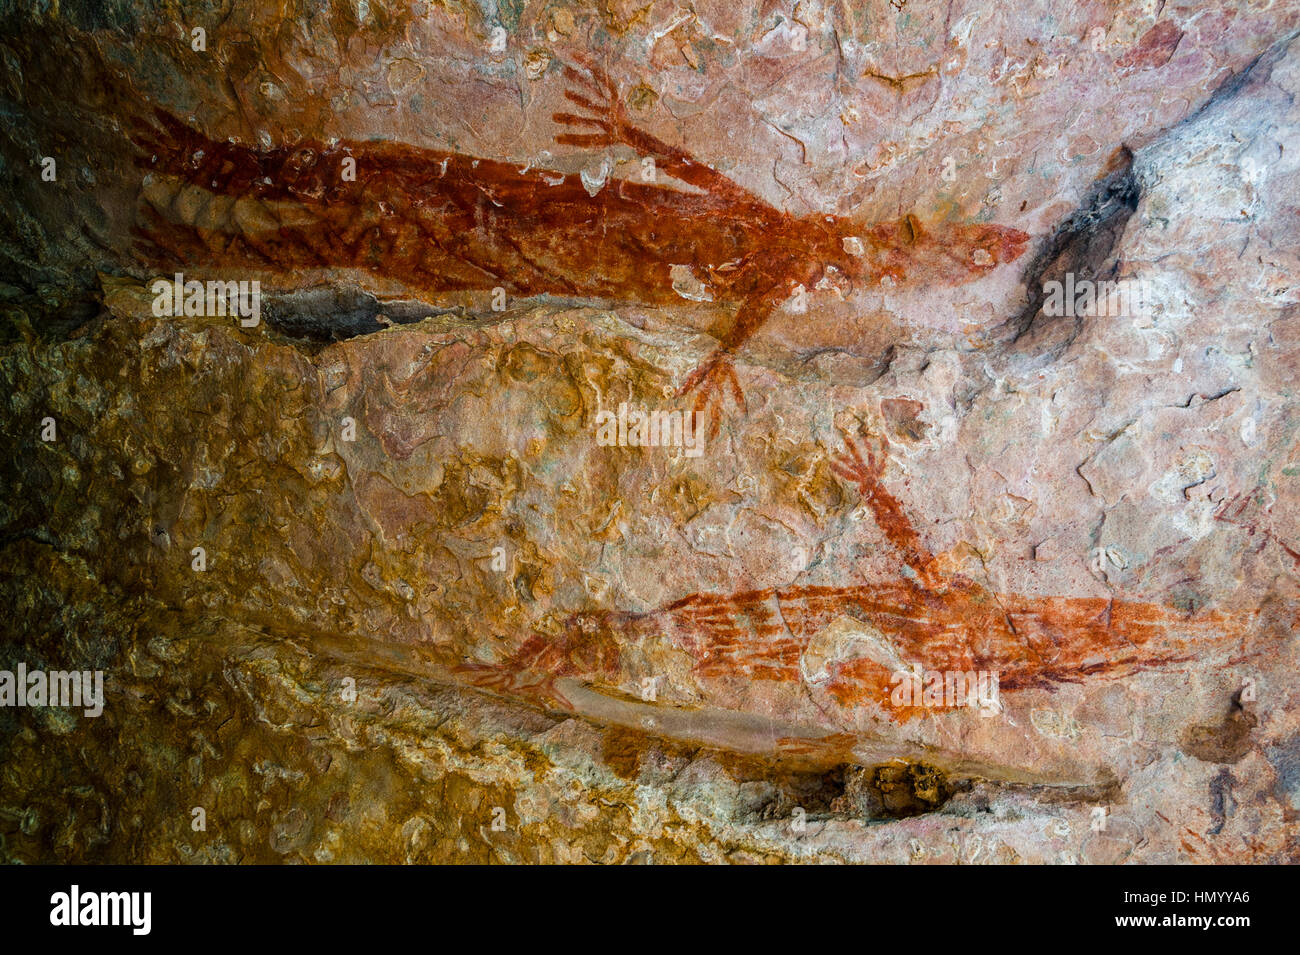 An ancient Wandjina painting featuring animals on the wall of a cave. Stock Photo